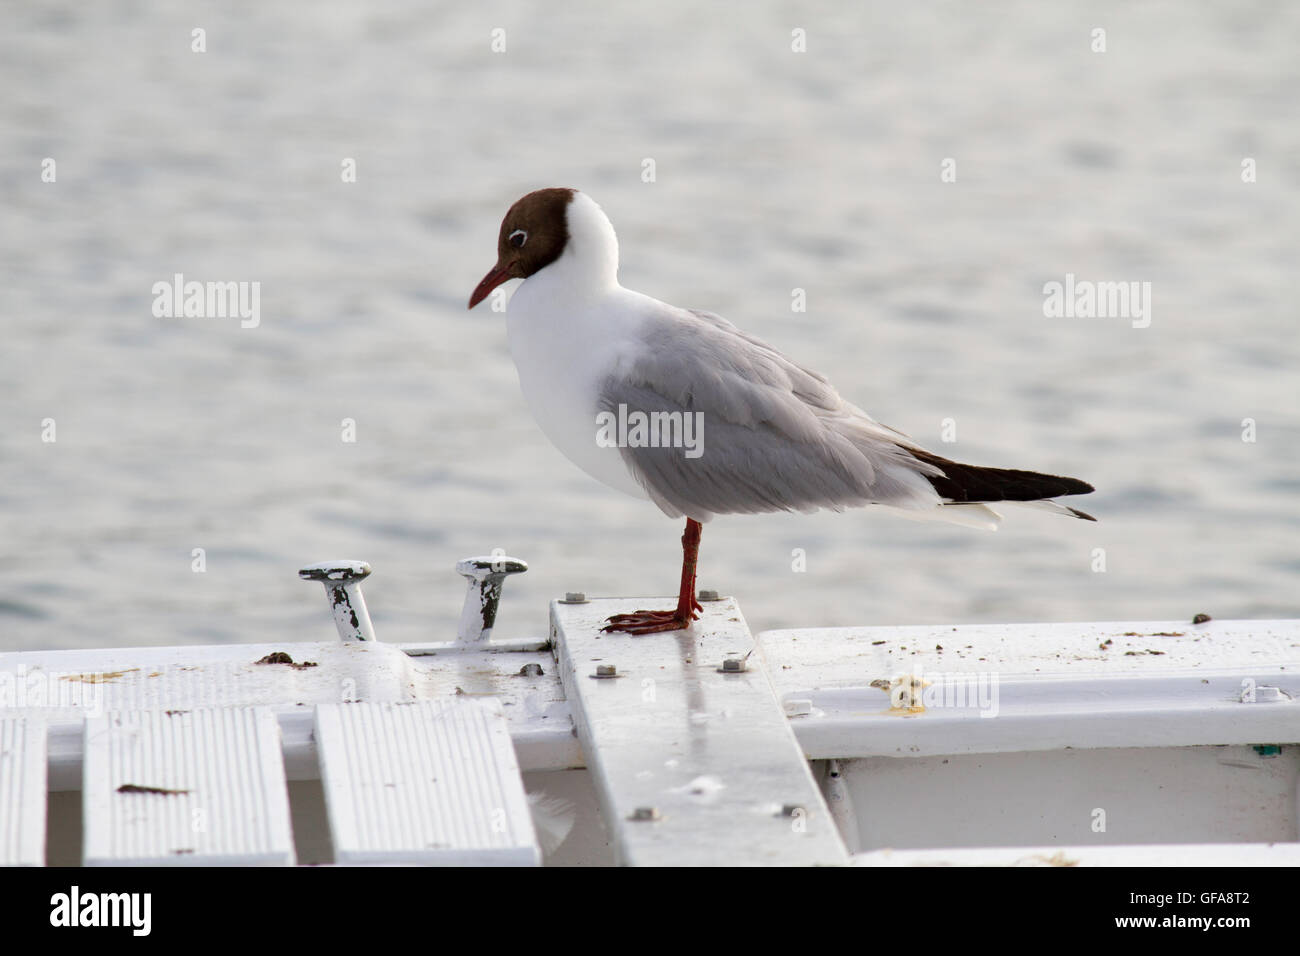 portrait of seagull on a boat in the Adriatic sea Stock Photo